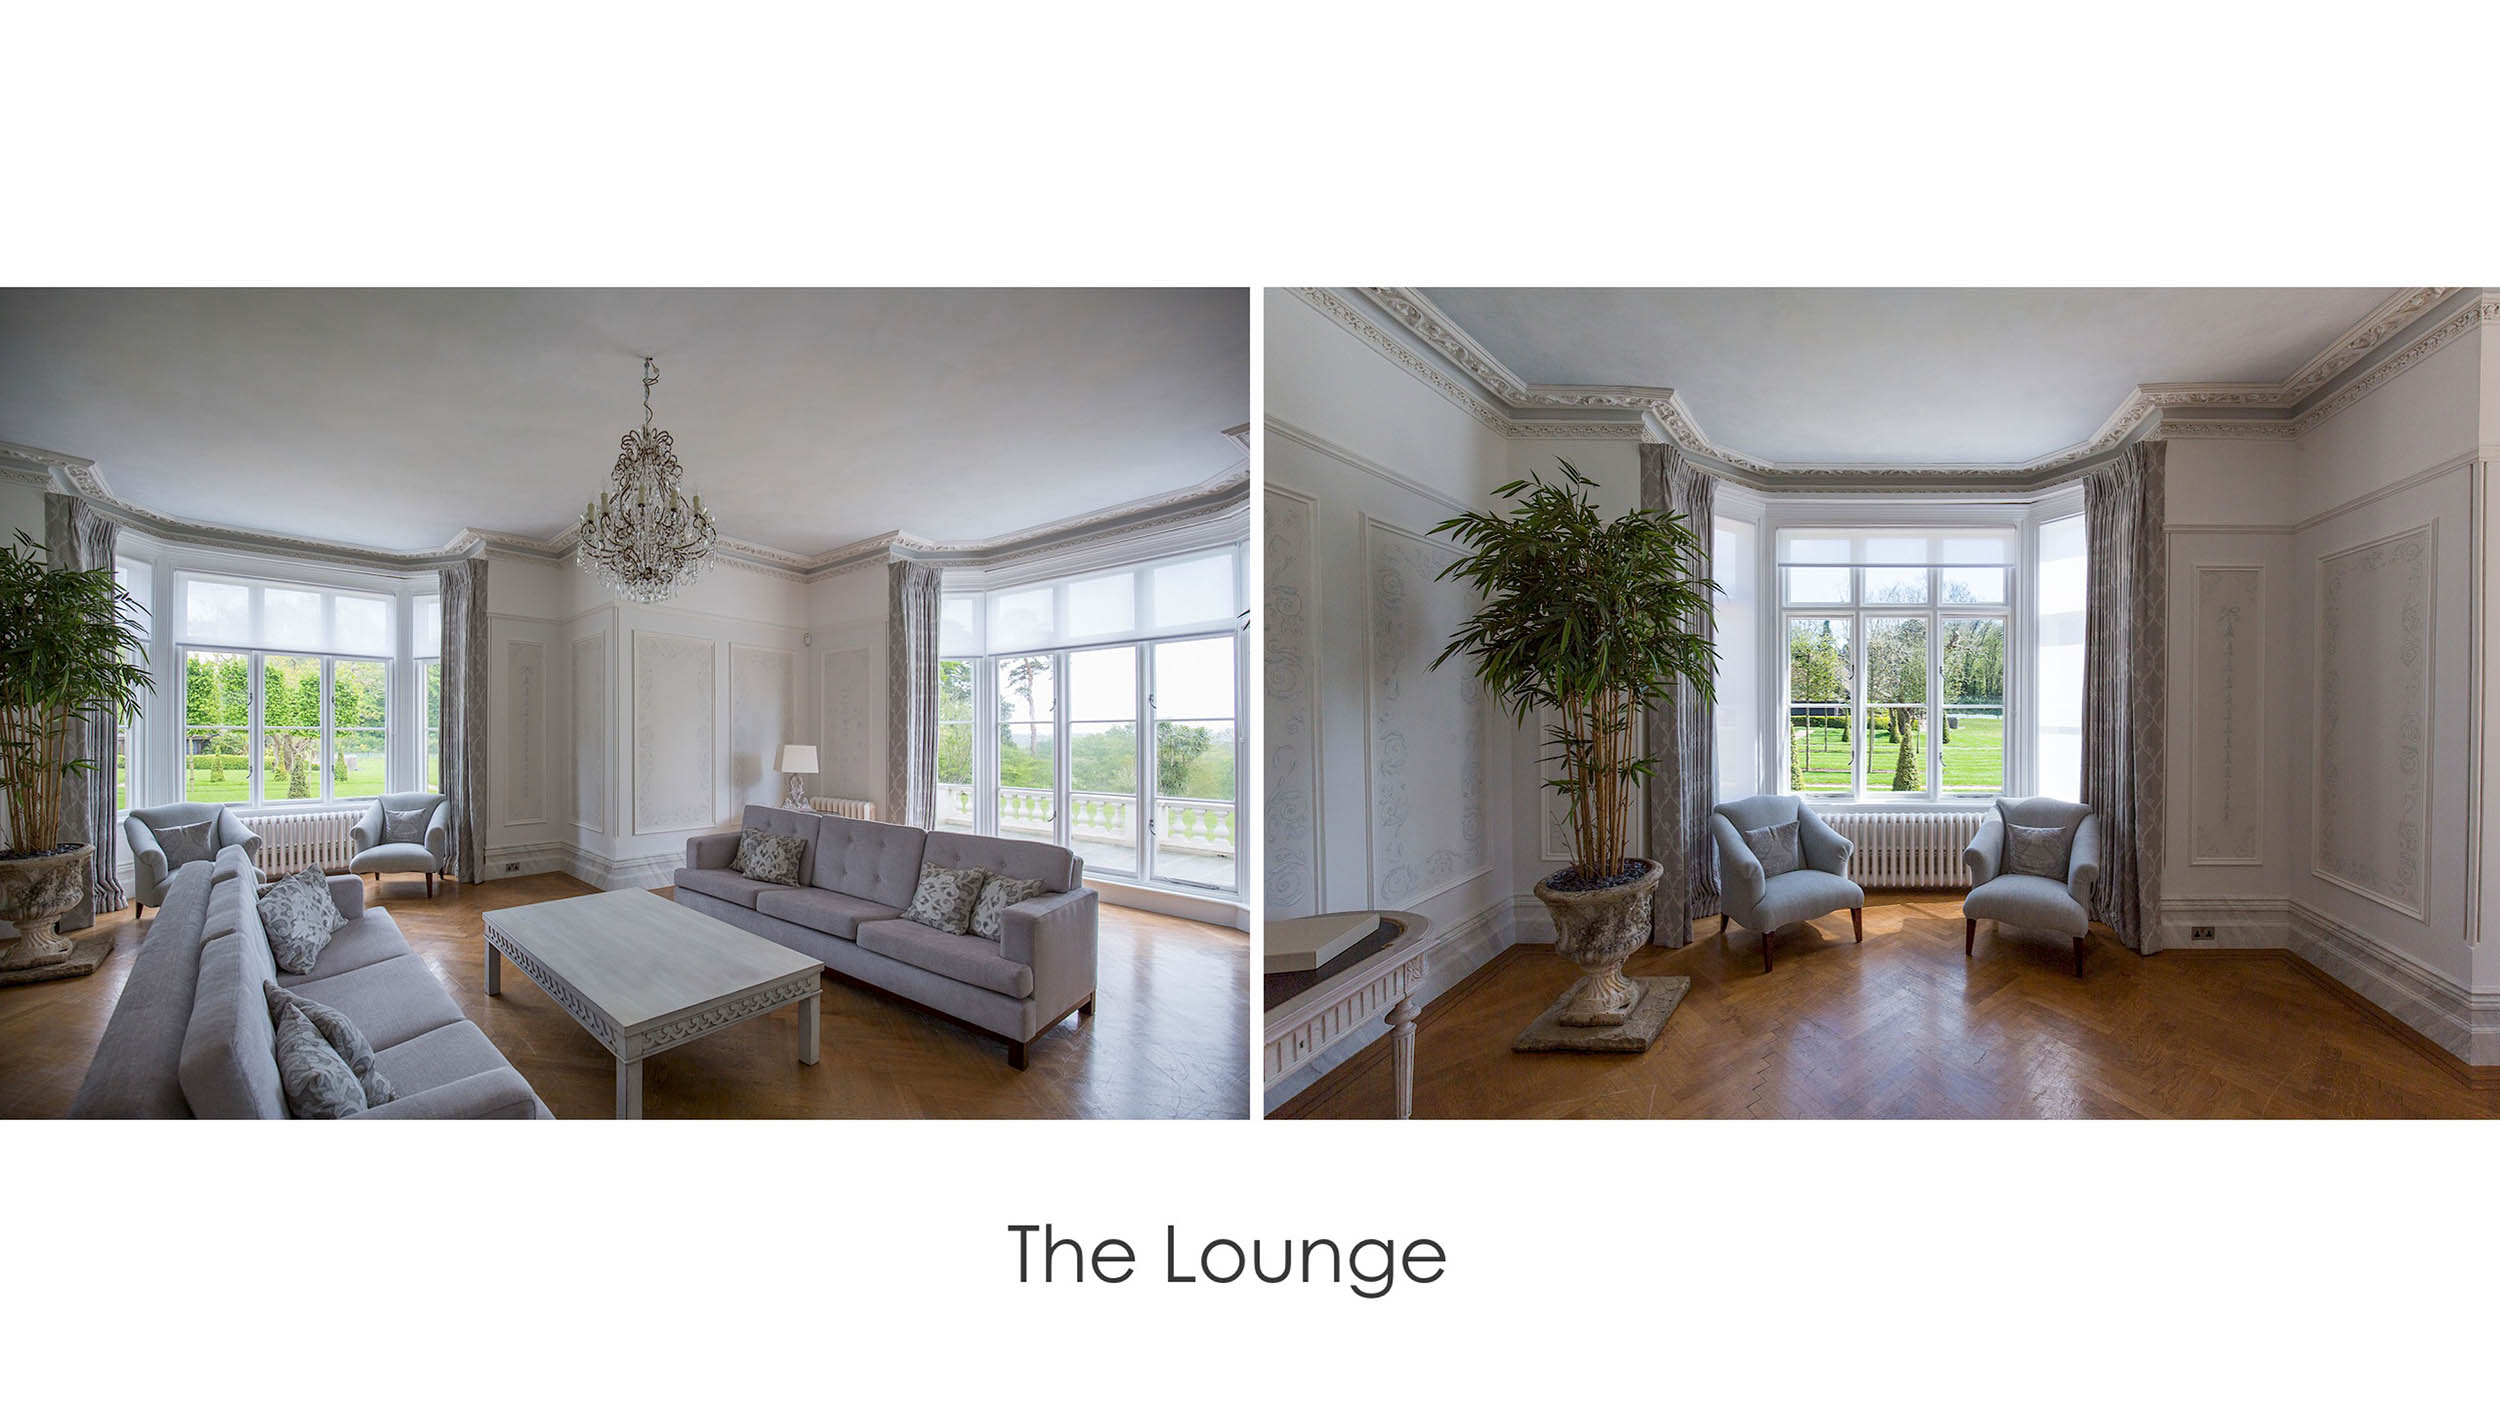 the Lounge - Pennybridge House - Real Estate Development Projects by Gabriella Atkinson.